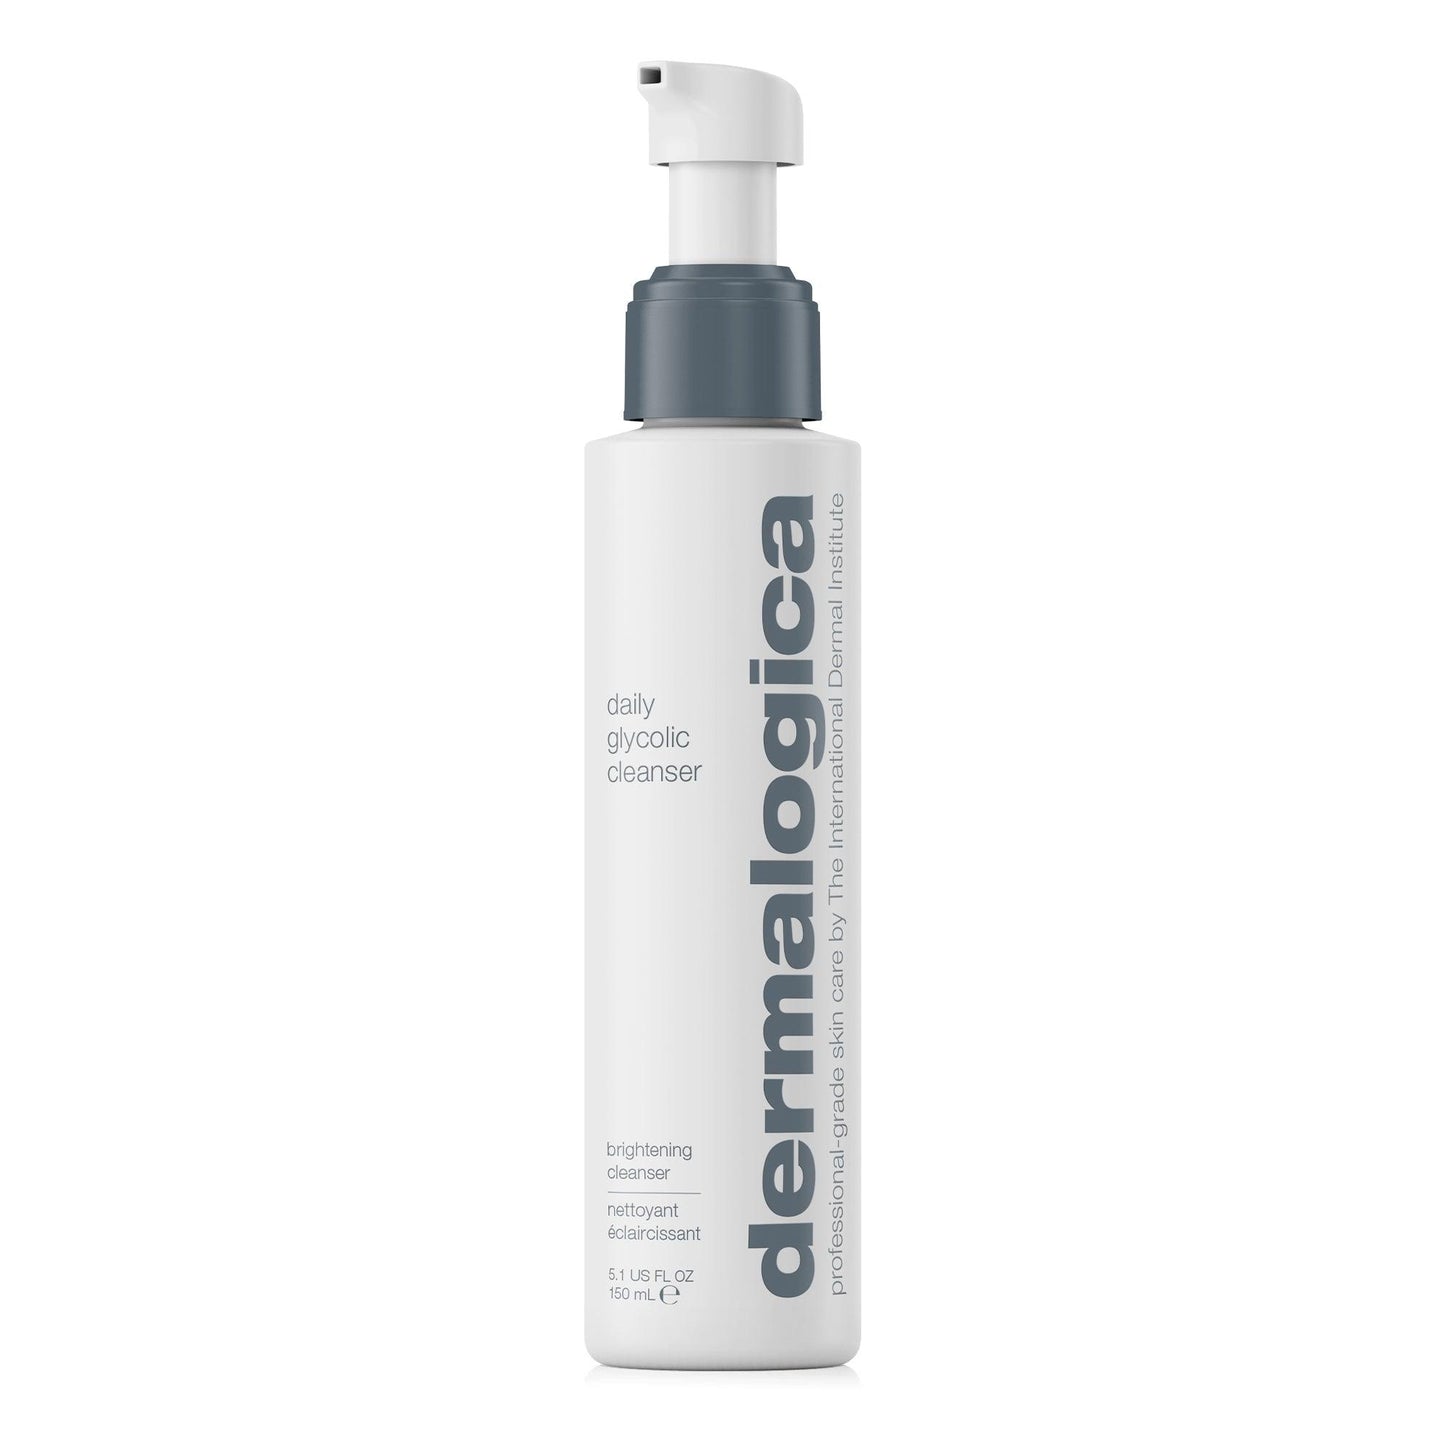 daily glycolic cleanser 295ml - Dermalogica Malaysia